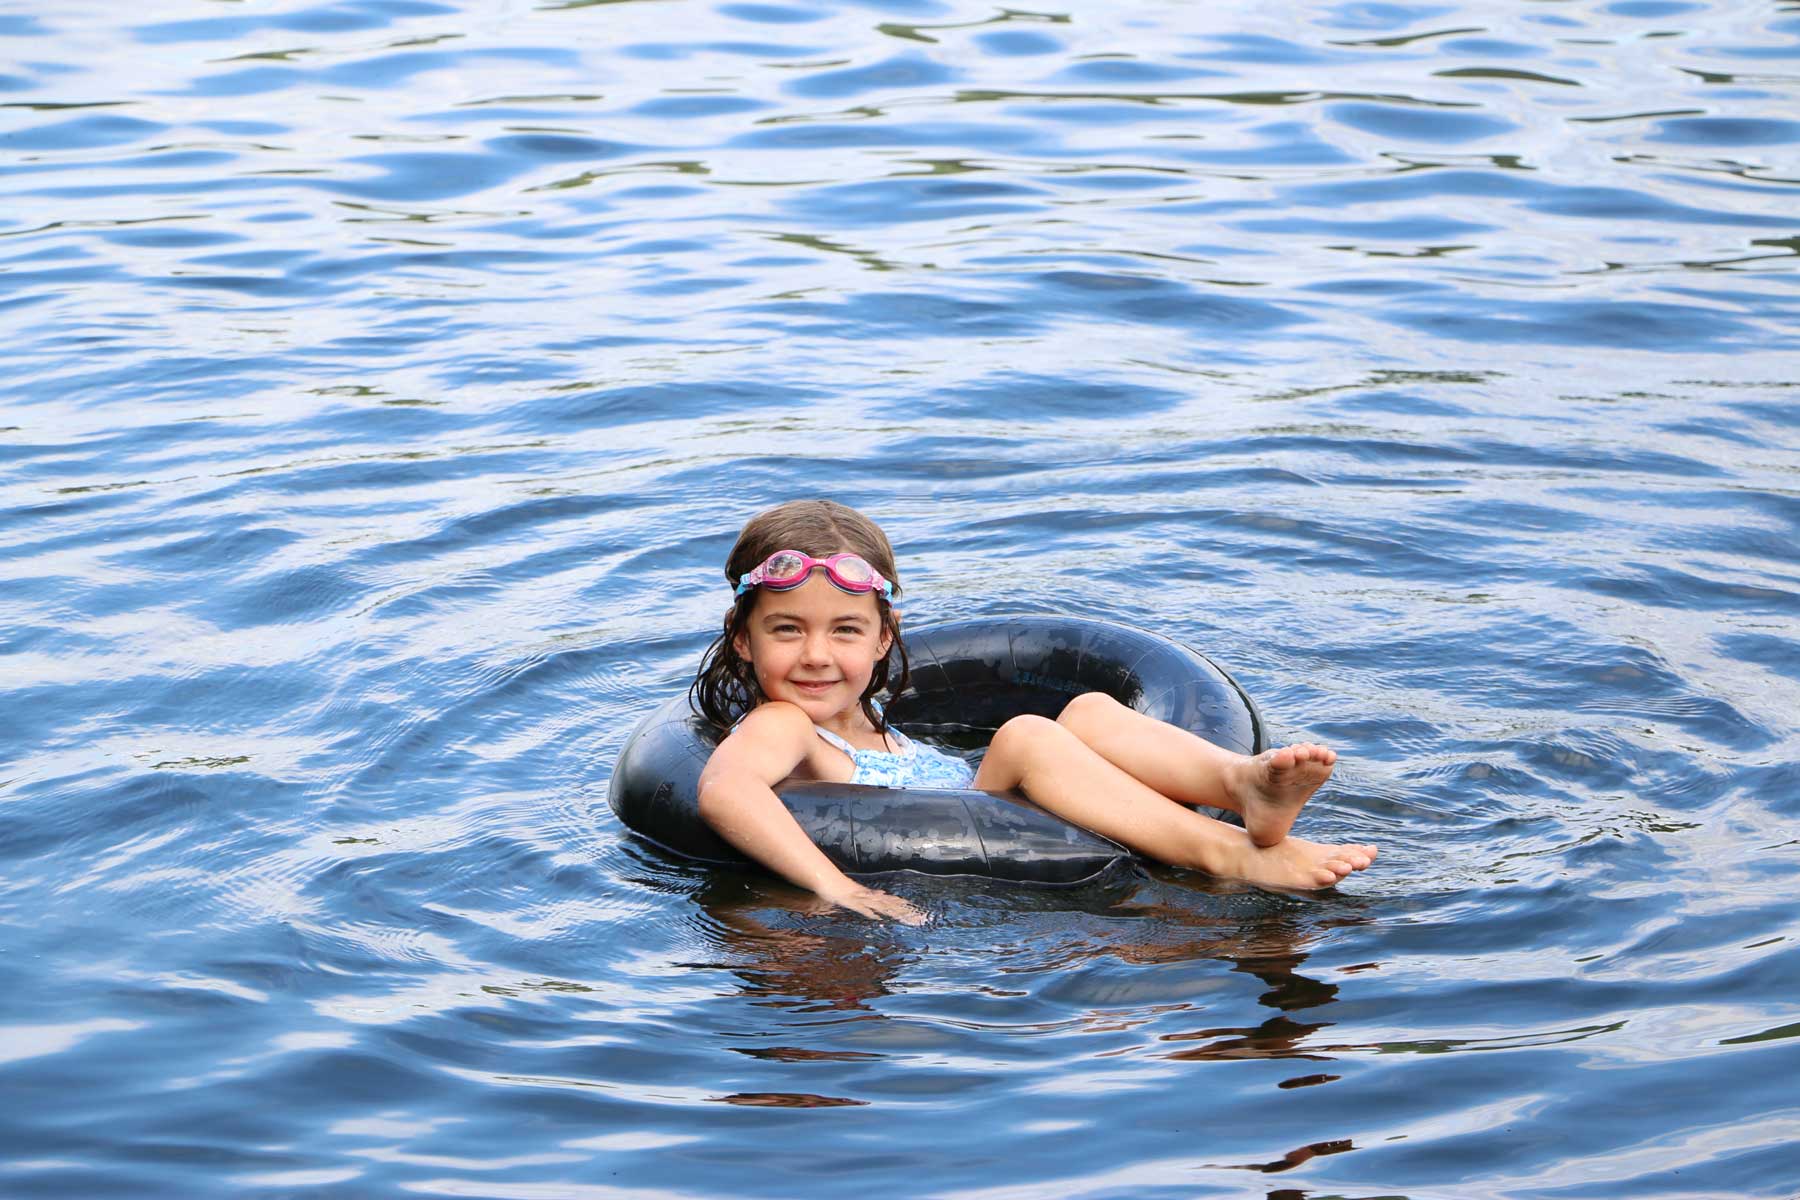 A young girl floats in an inner tube